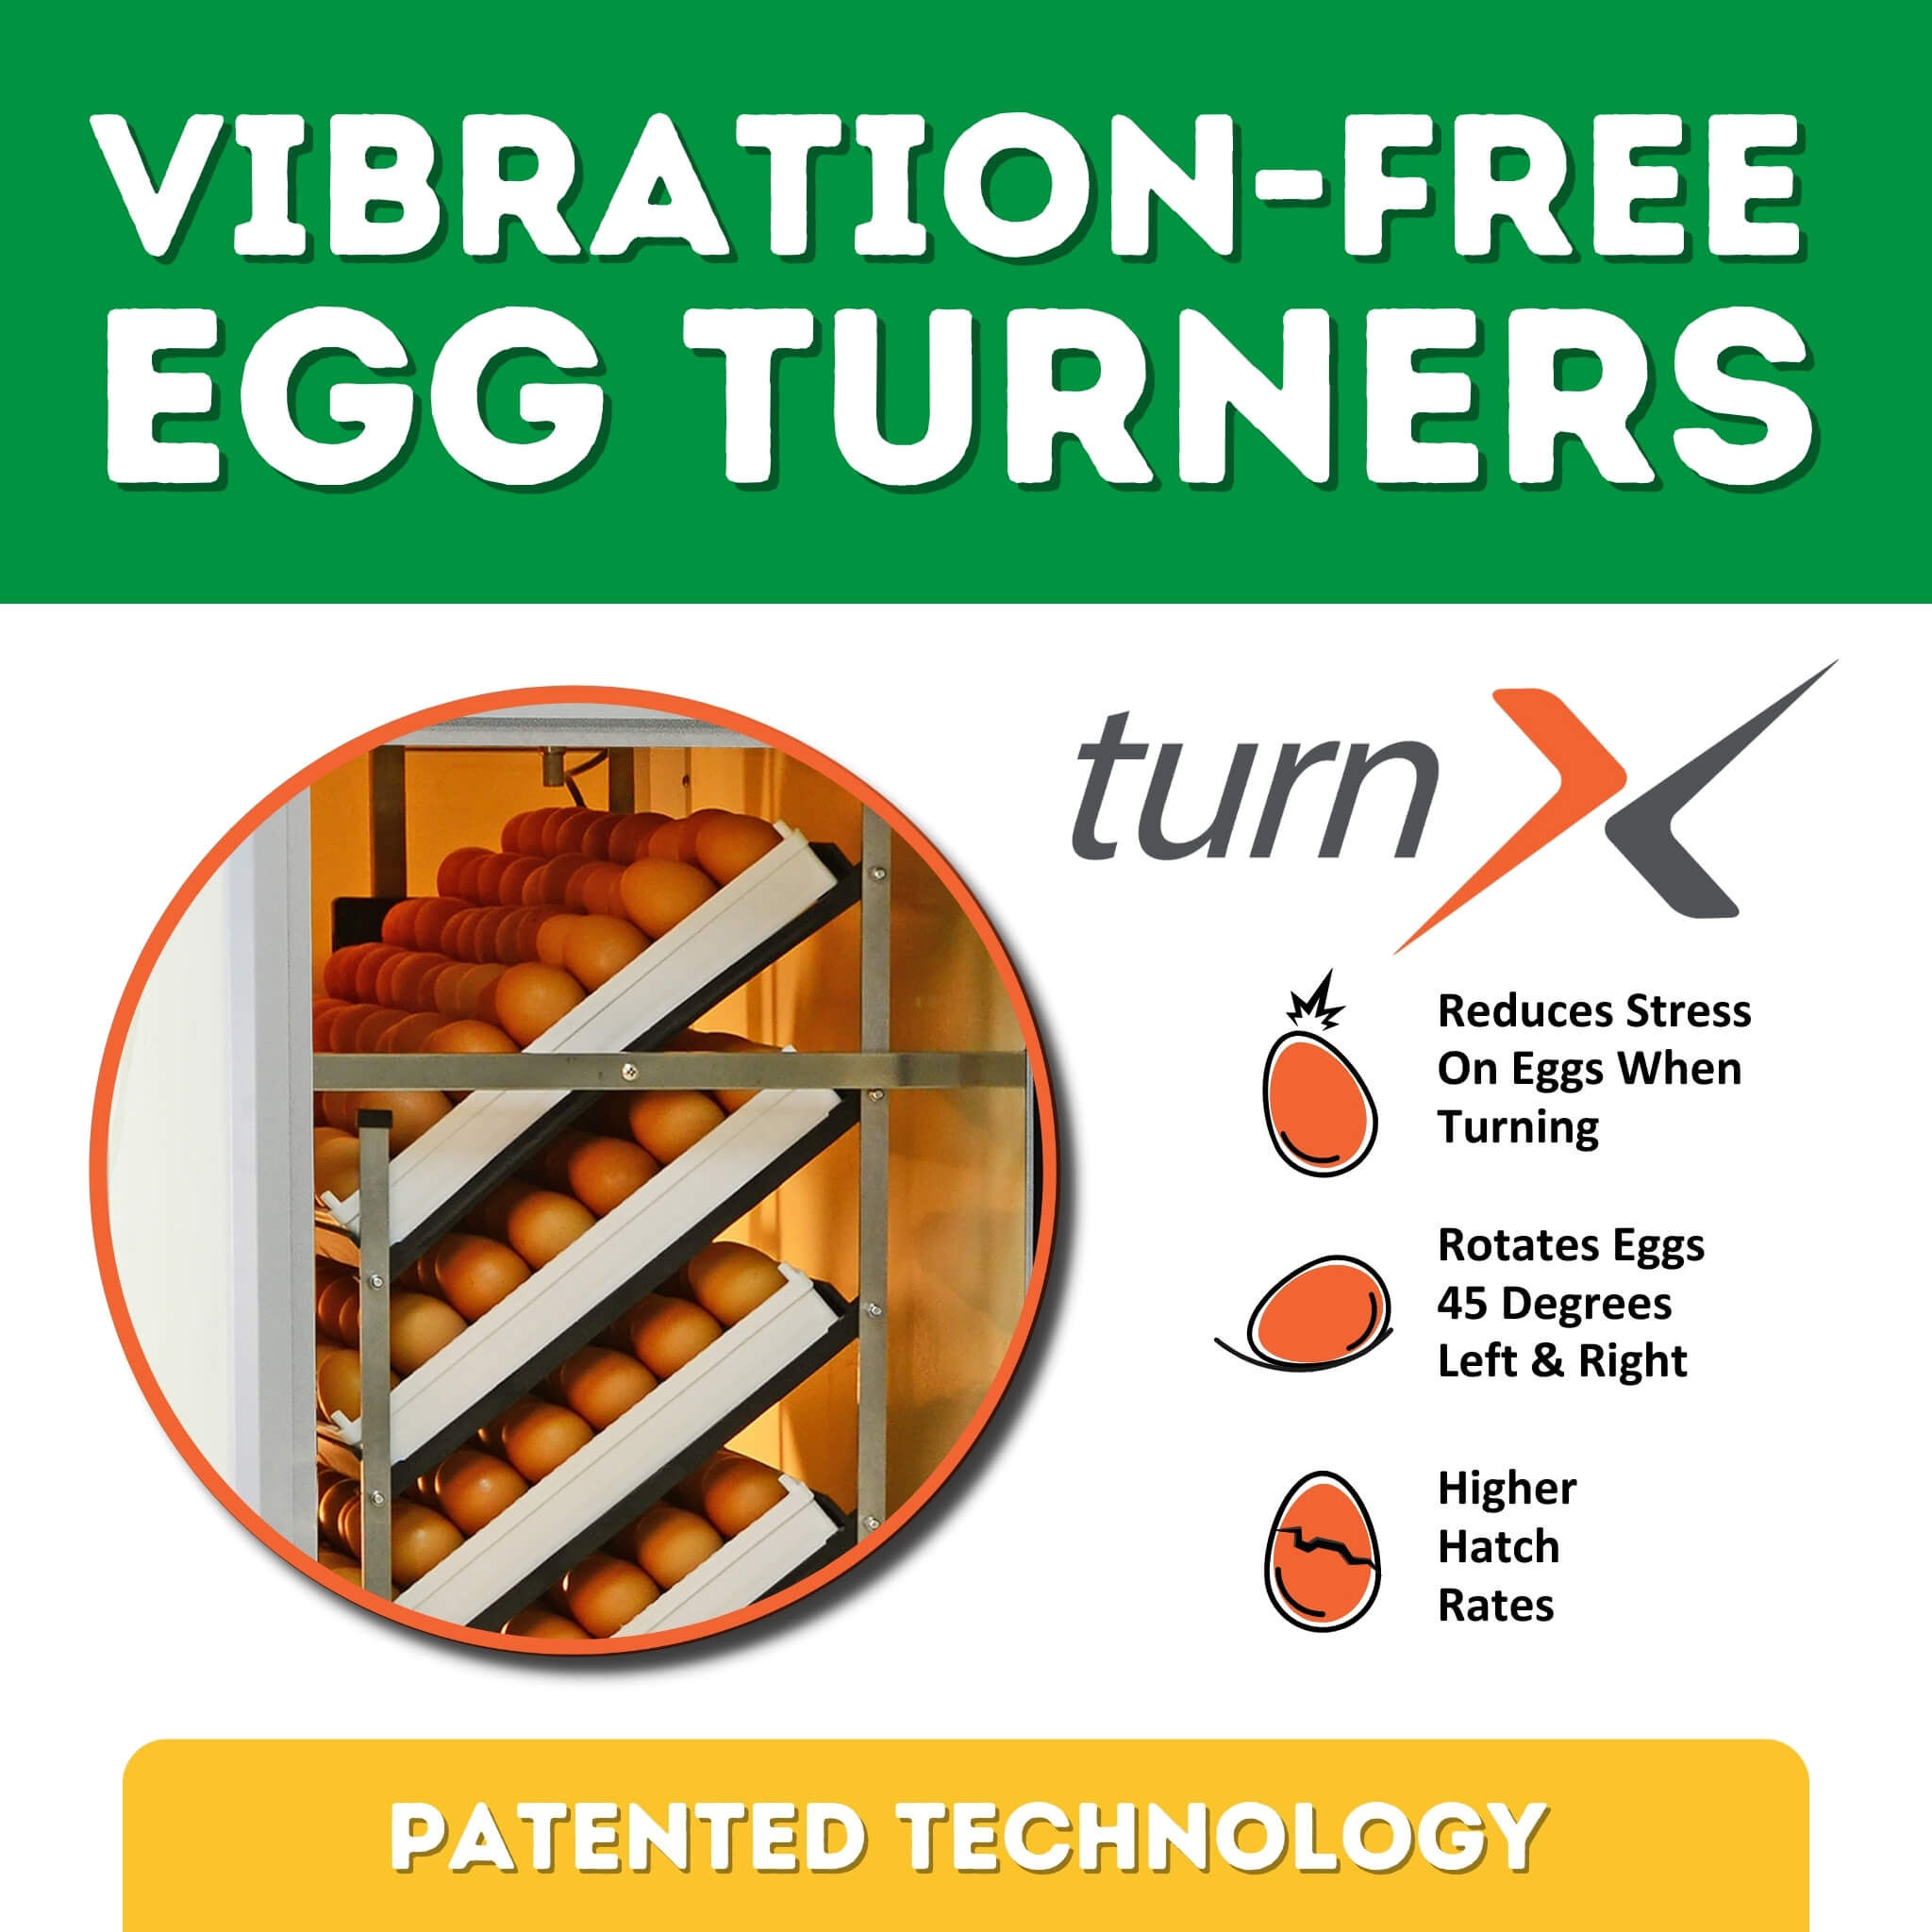 Hatching Time Cimuka. TurnX technology in Cimuka HB500S, a patented feature for stress-free, directional egg turning, enhancing hatch rates in poultry incubation